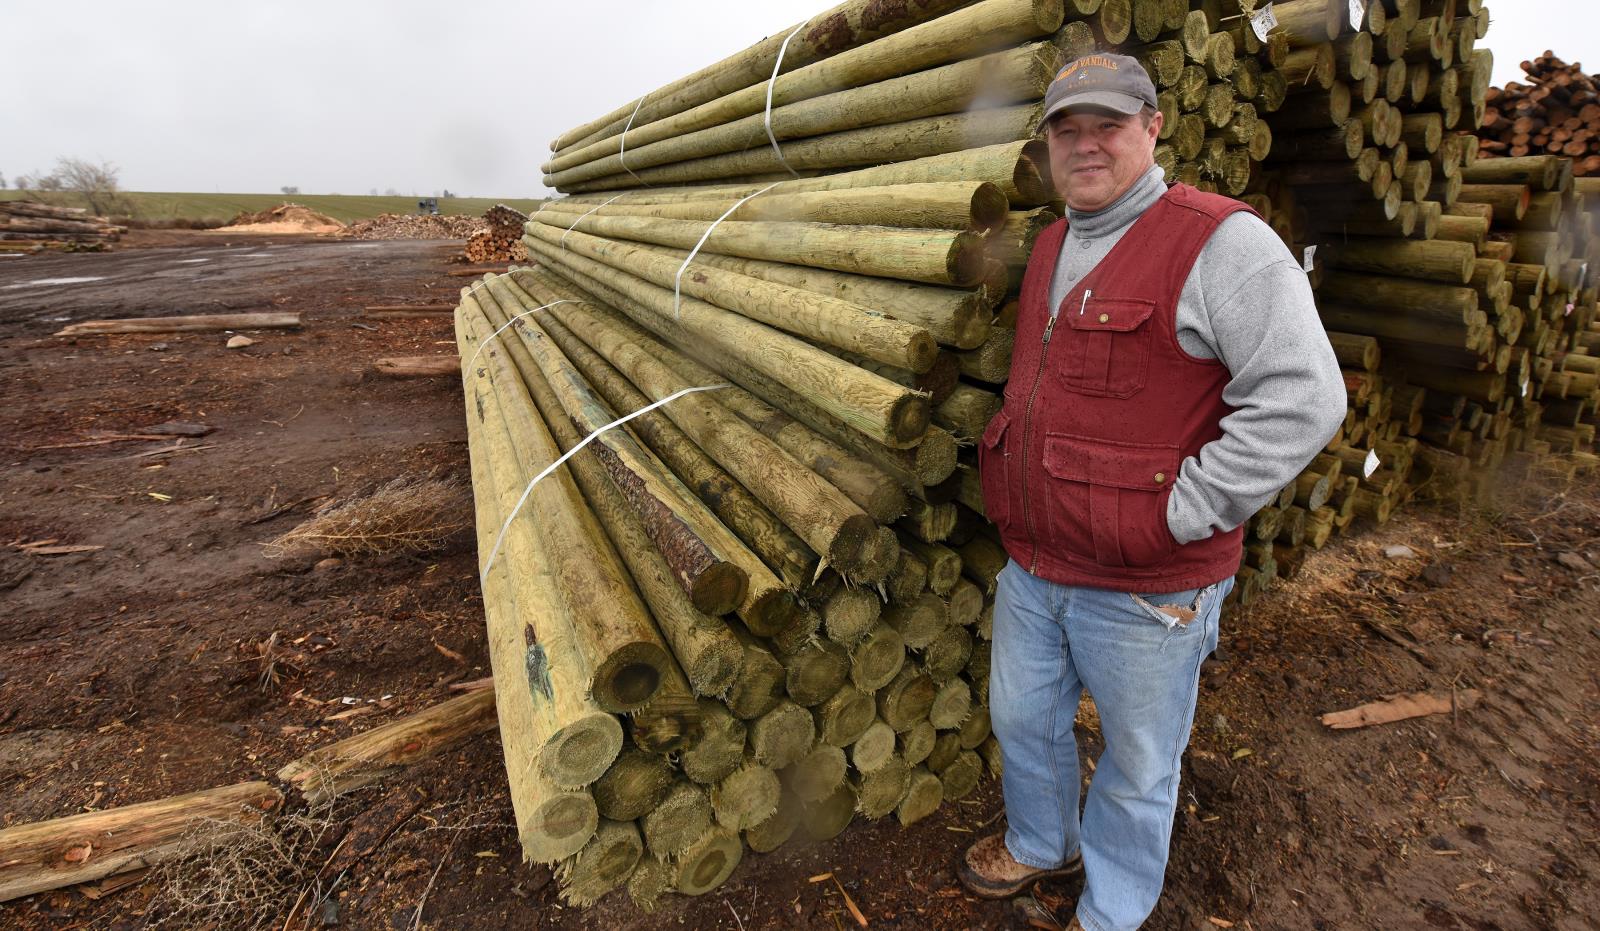 Mike Sterling, owner of Parma Post & Pole, stands next to treated hop poles in the lumber yard.